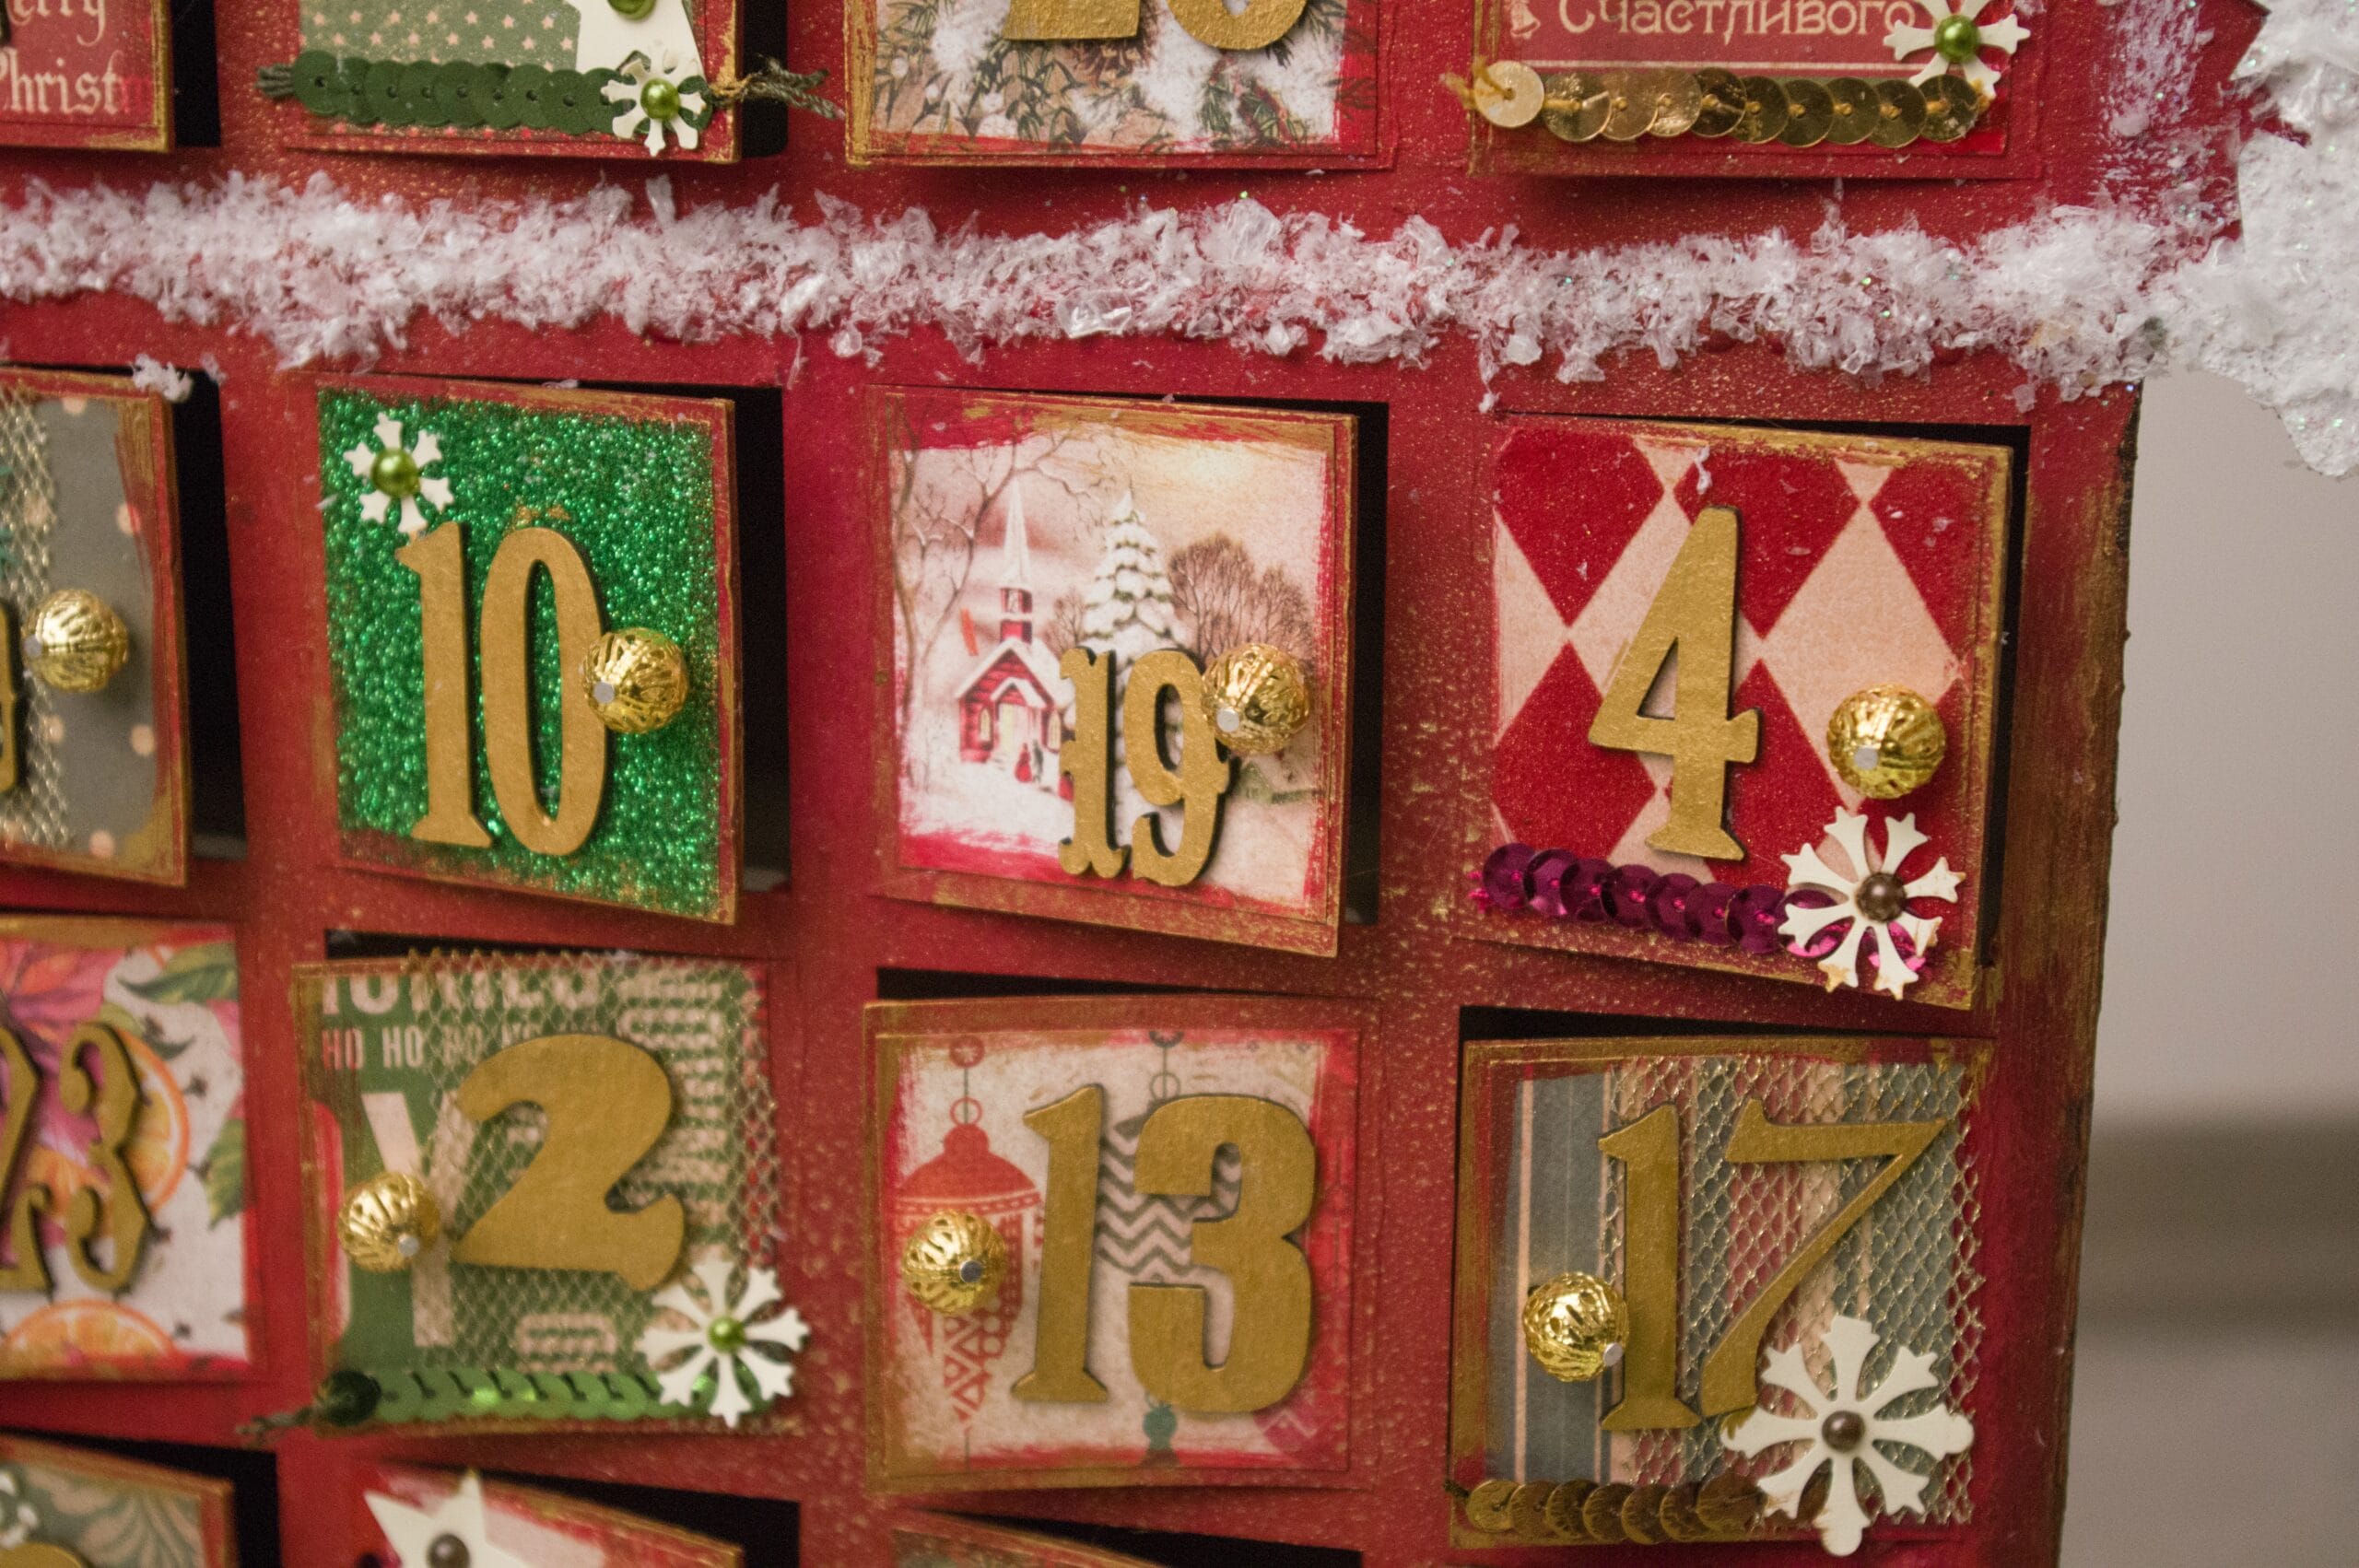 1.    What calendar traditionally helps you countdown to Christmas?